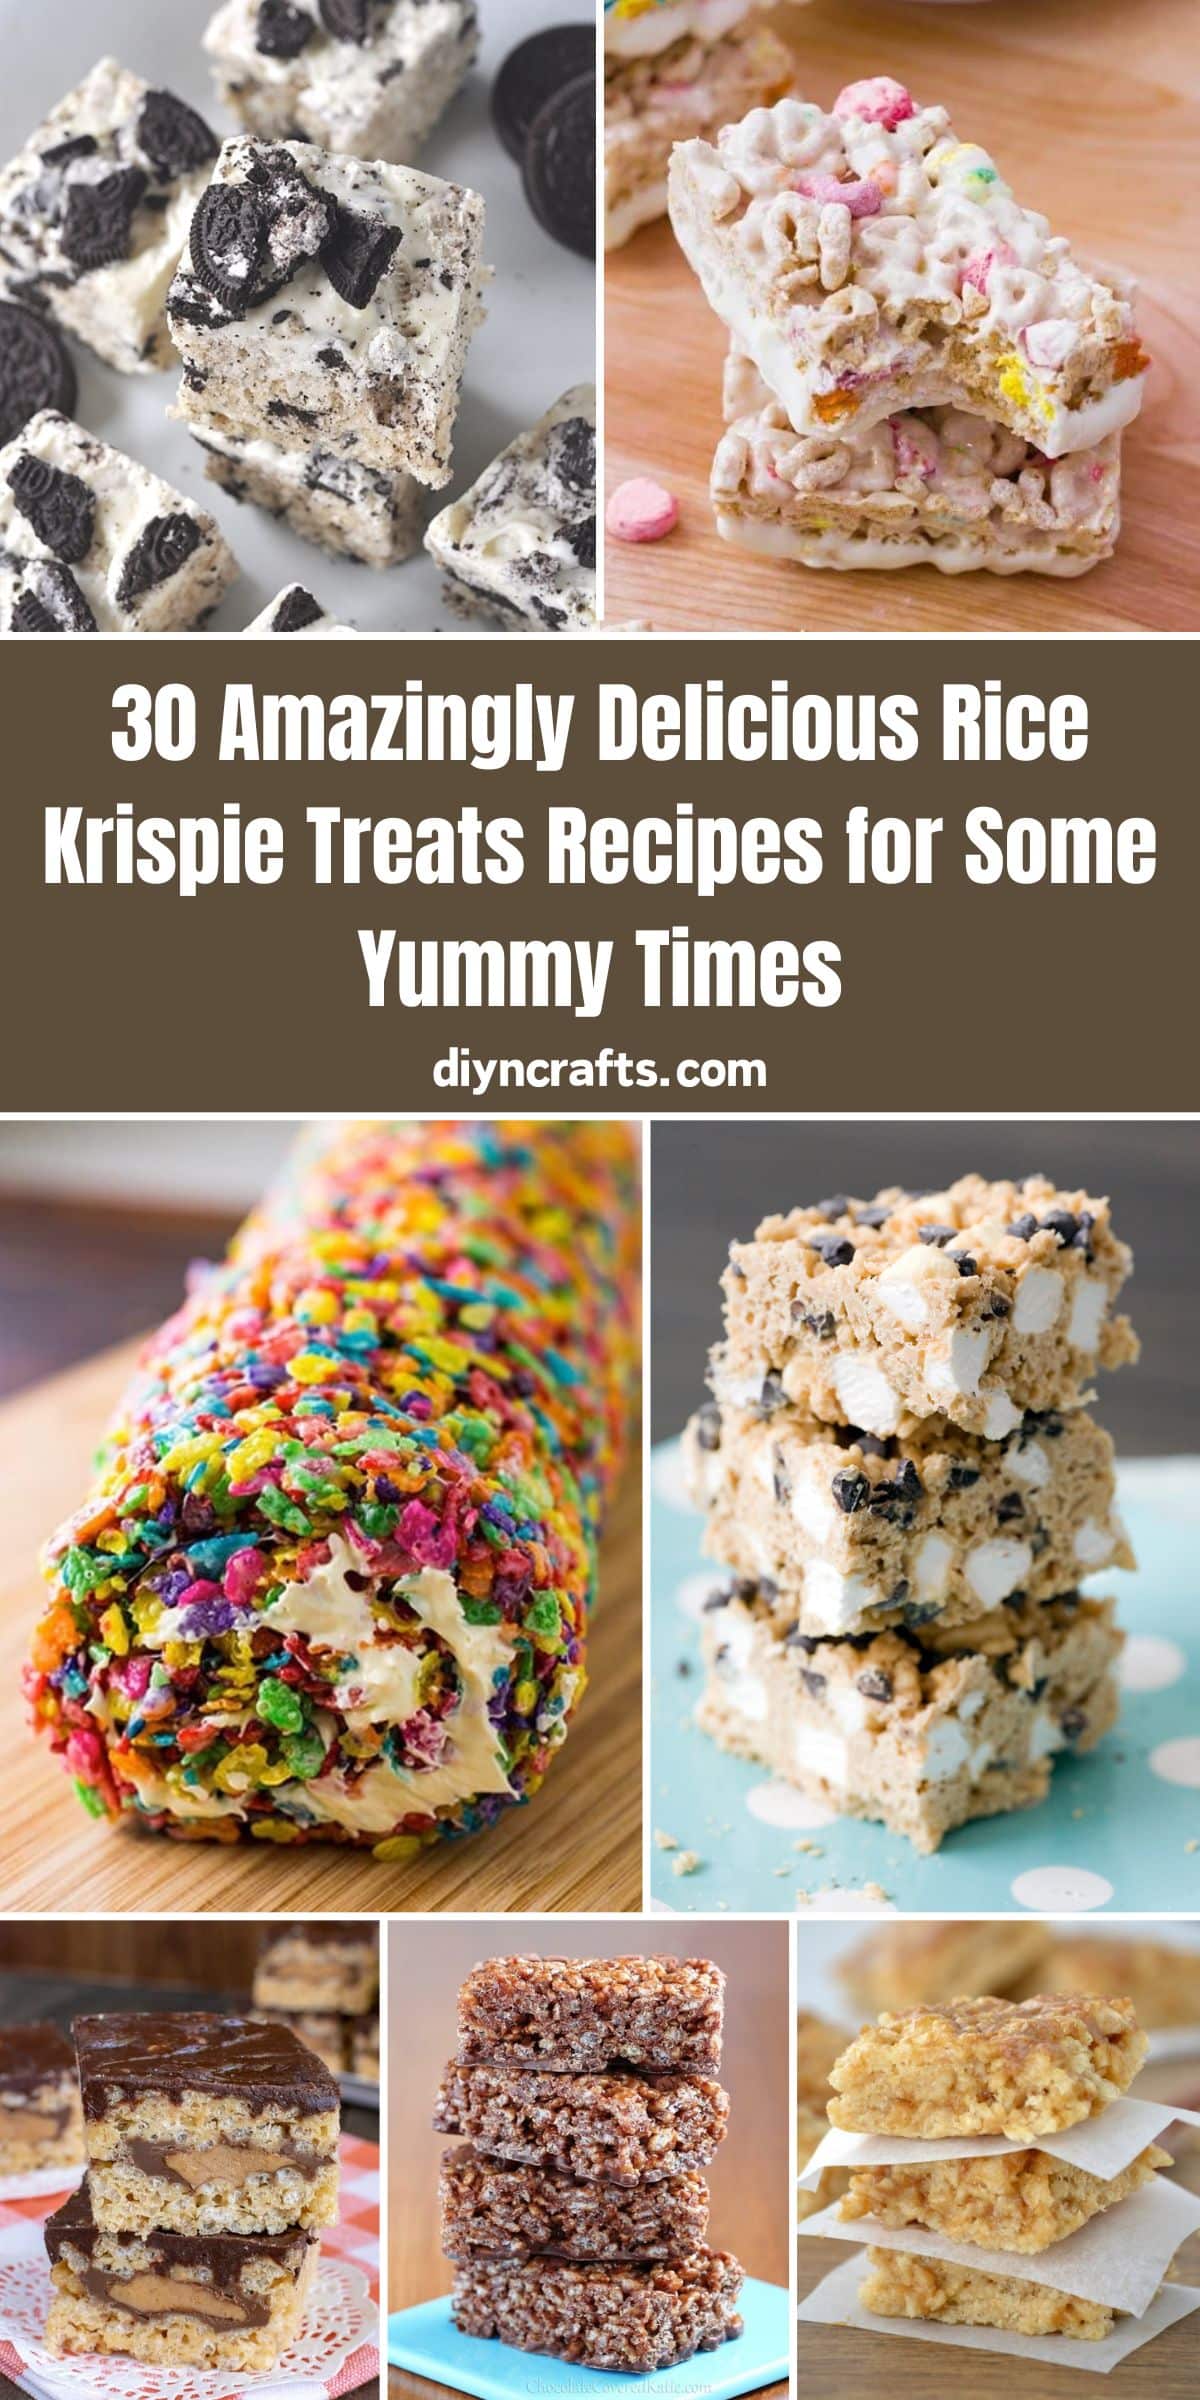 30 Amazingly Delicious Rice Krispie Treats Recipes for Some Yummy Times collage.